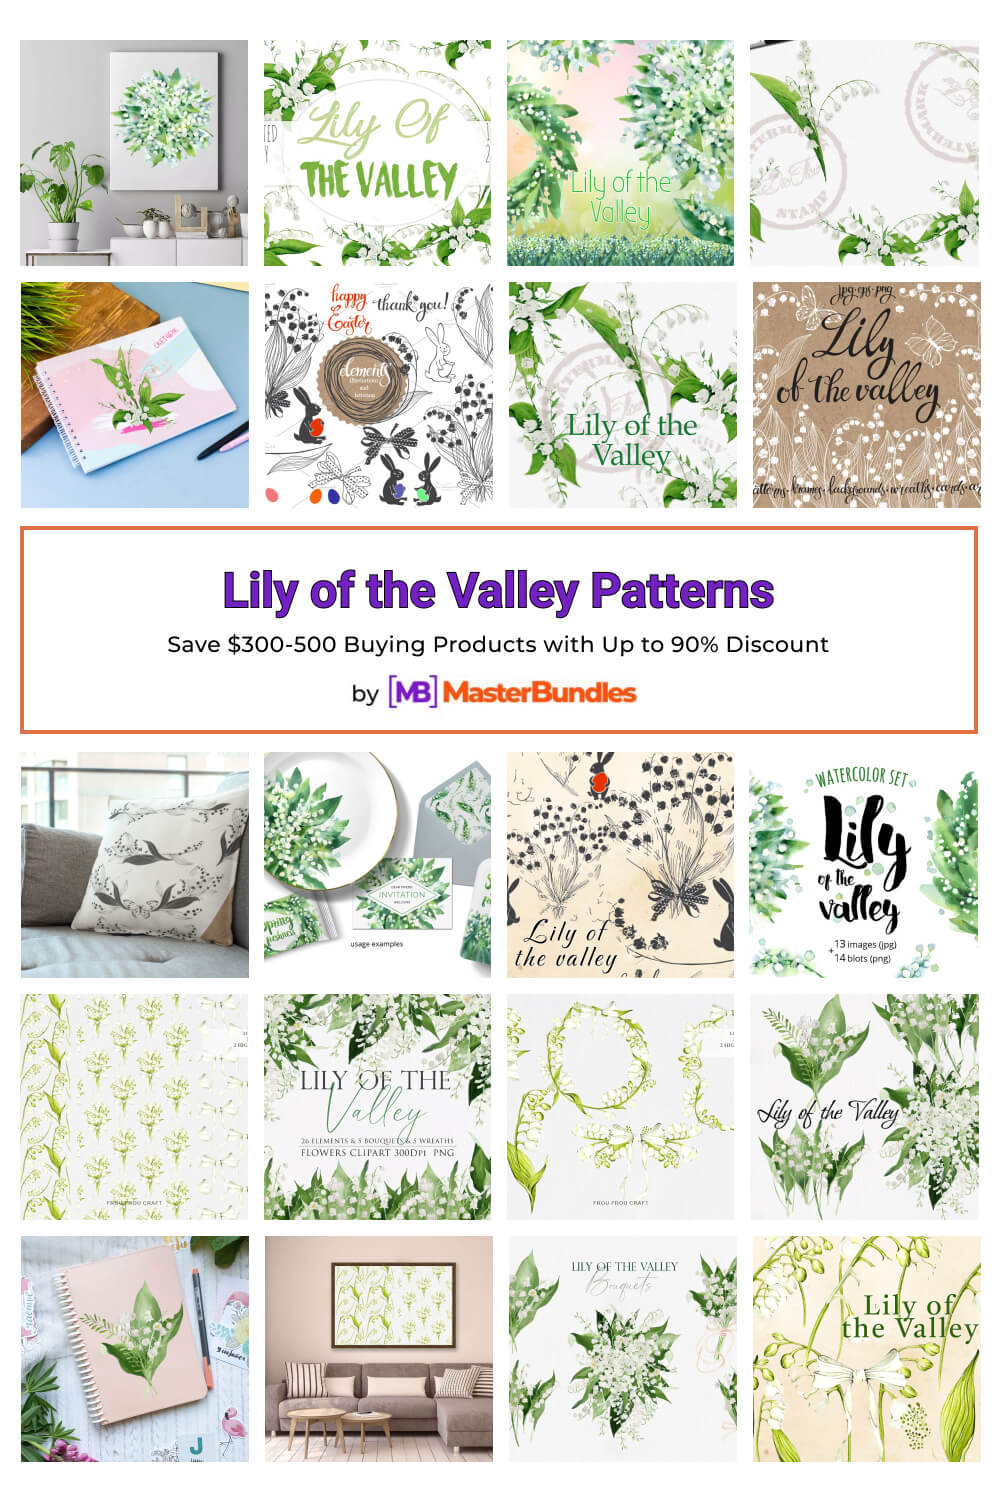 lily of the valley patterns pinterest image.